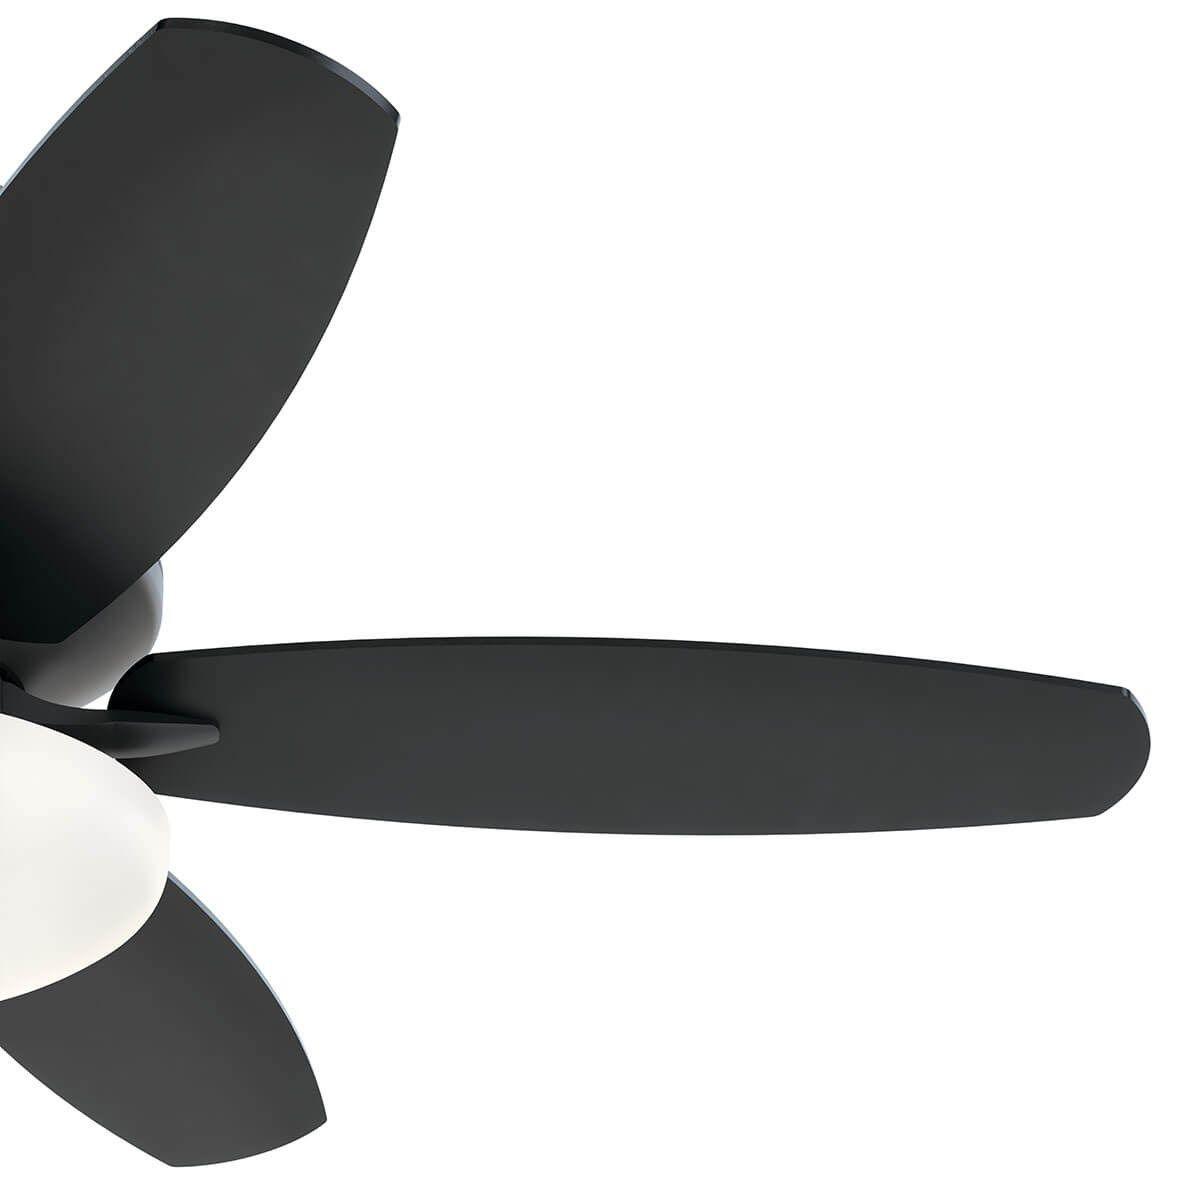 Renew Select 52 Inch Contemporary Ceiling Fan With Light - Bees Lighting